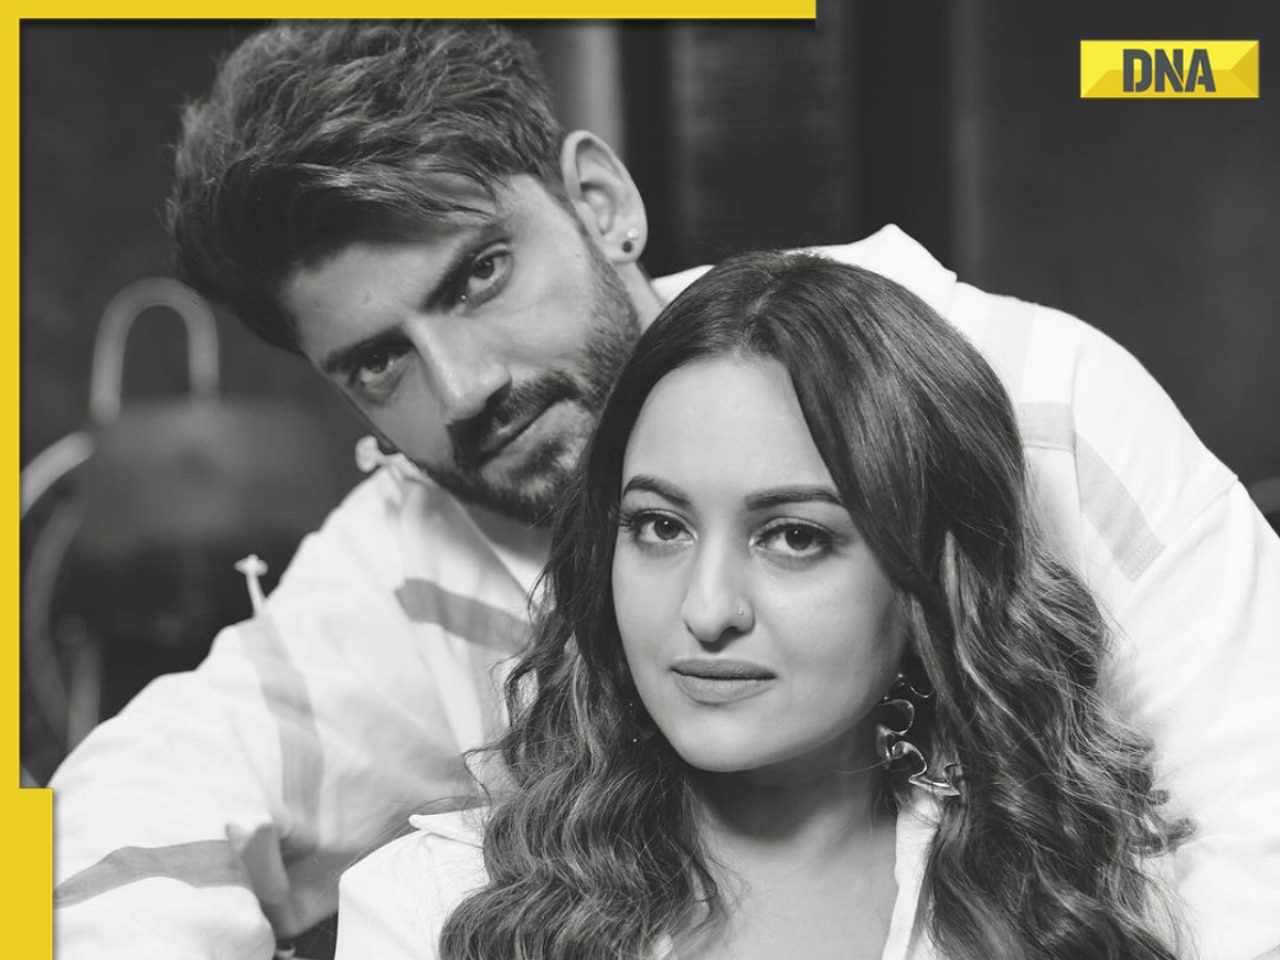 Sonakshi Sinha to tie the knot with Zaheer Iqbal on this date, claims viral 'wedding invitation'